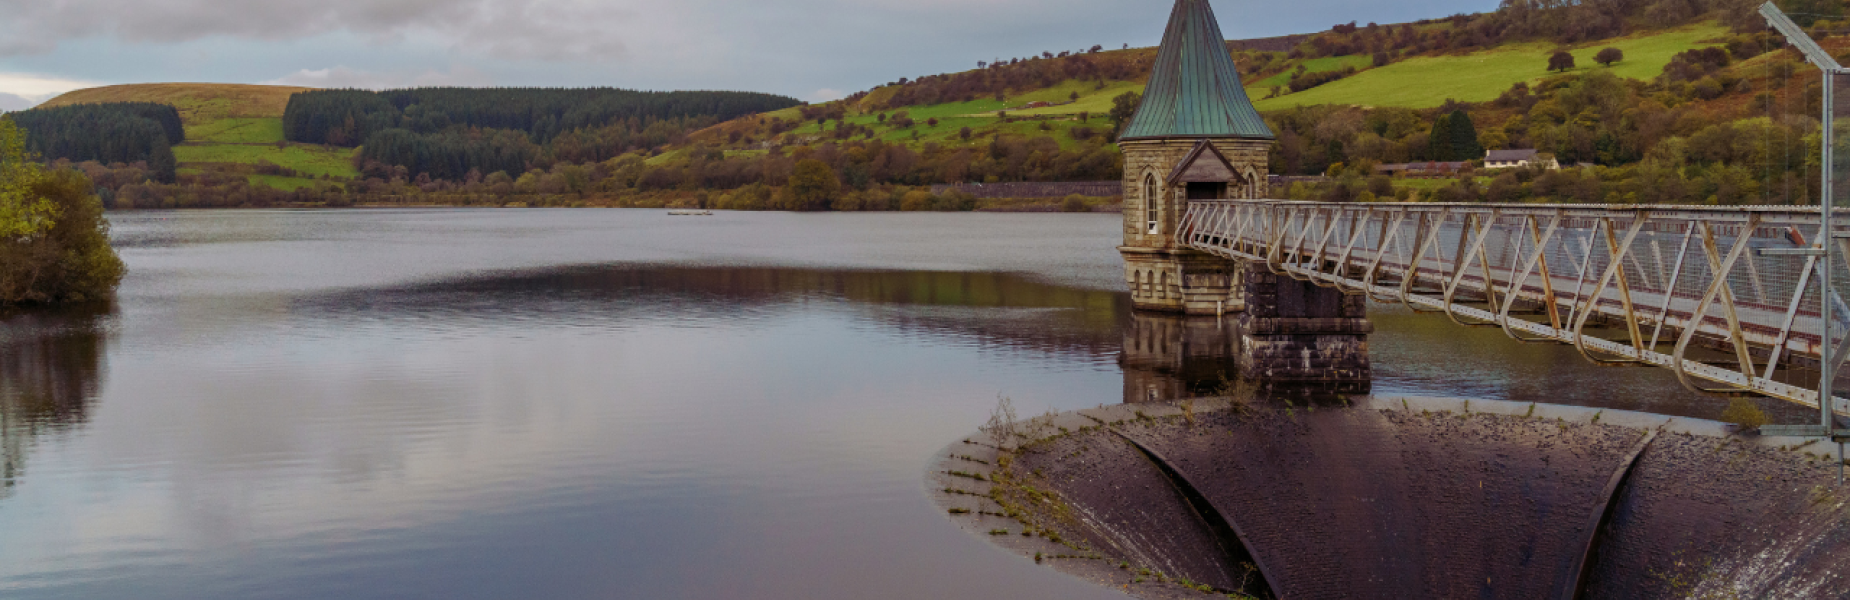 a picture of a reservoir in Merthyr